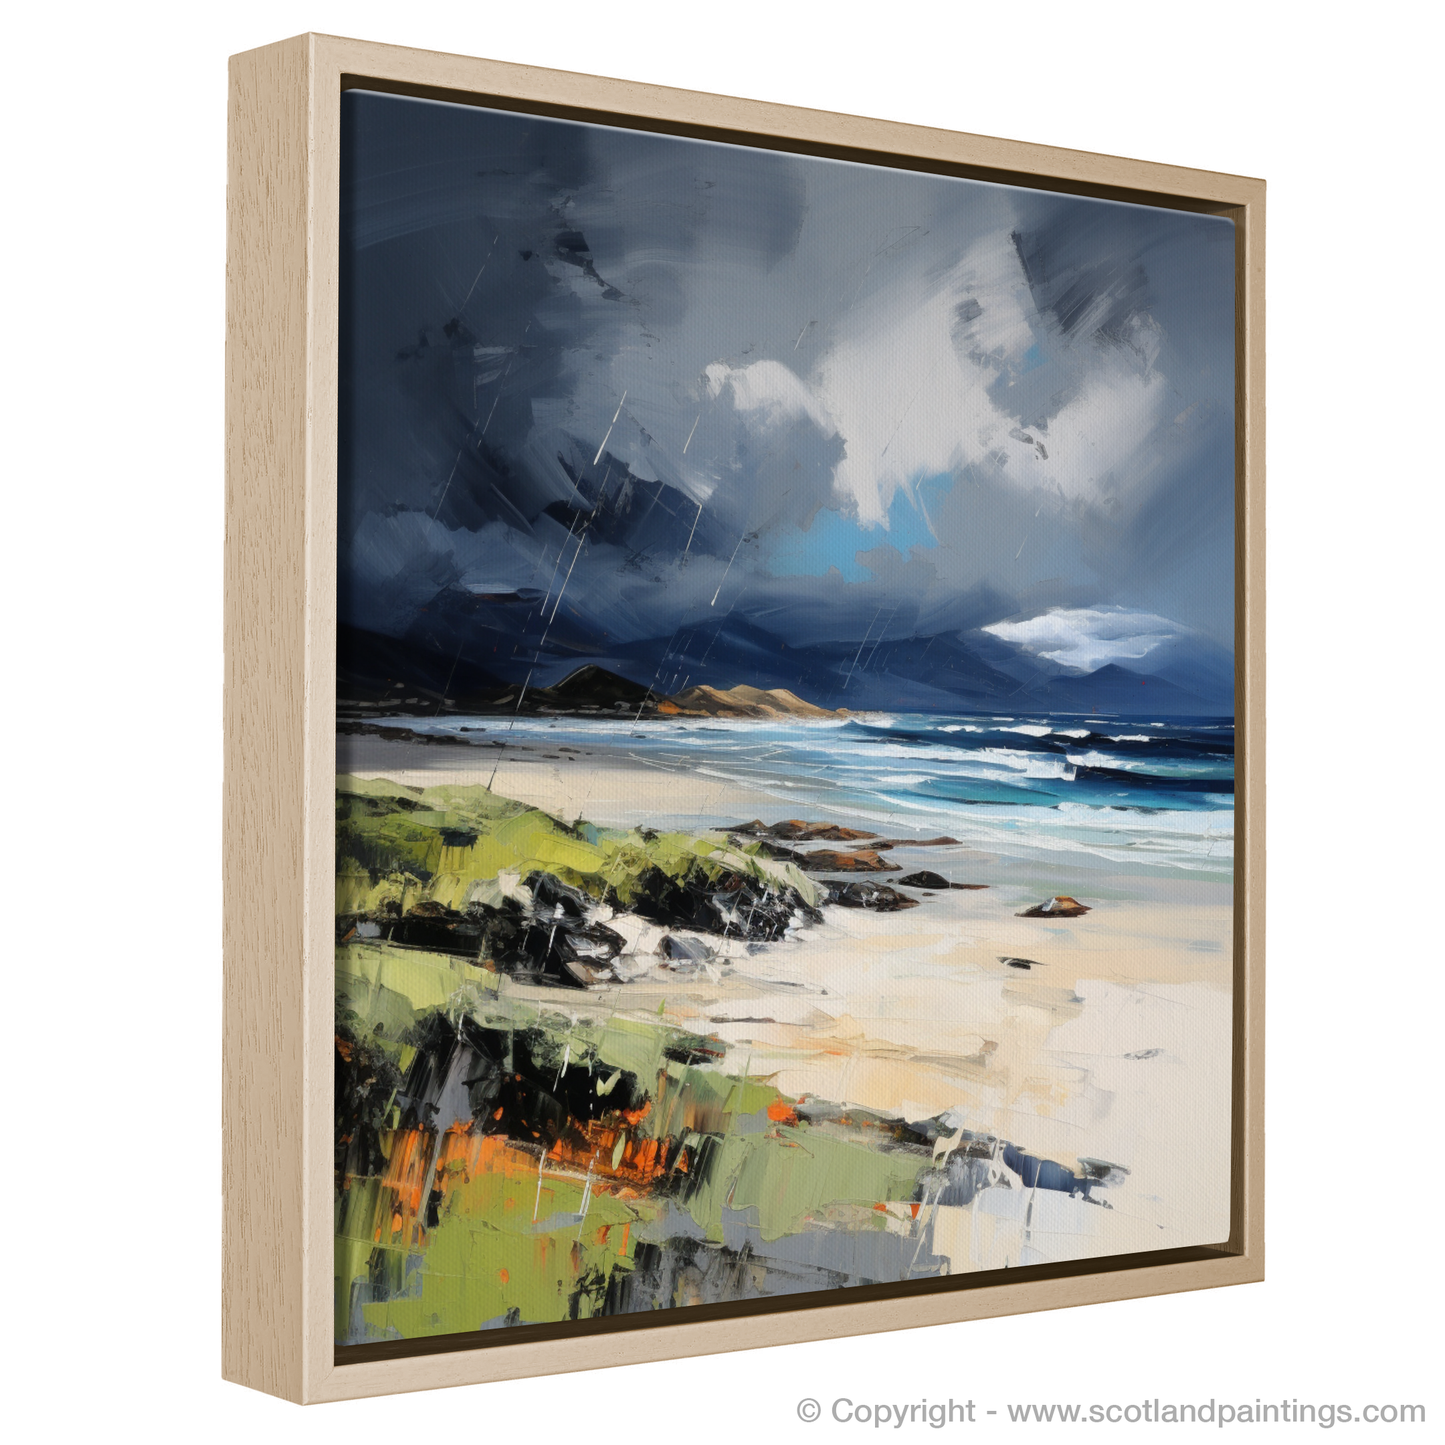 Painting and Art Print of Scarista Beach with a stormy sky. Storm's Embrace at Scarista Beach: An Expressionist Homage.